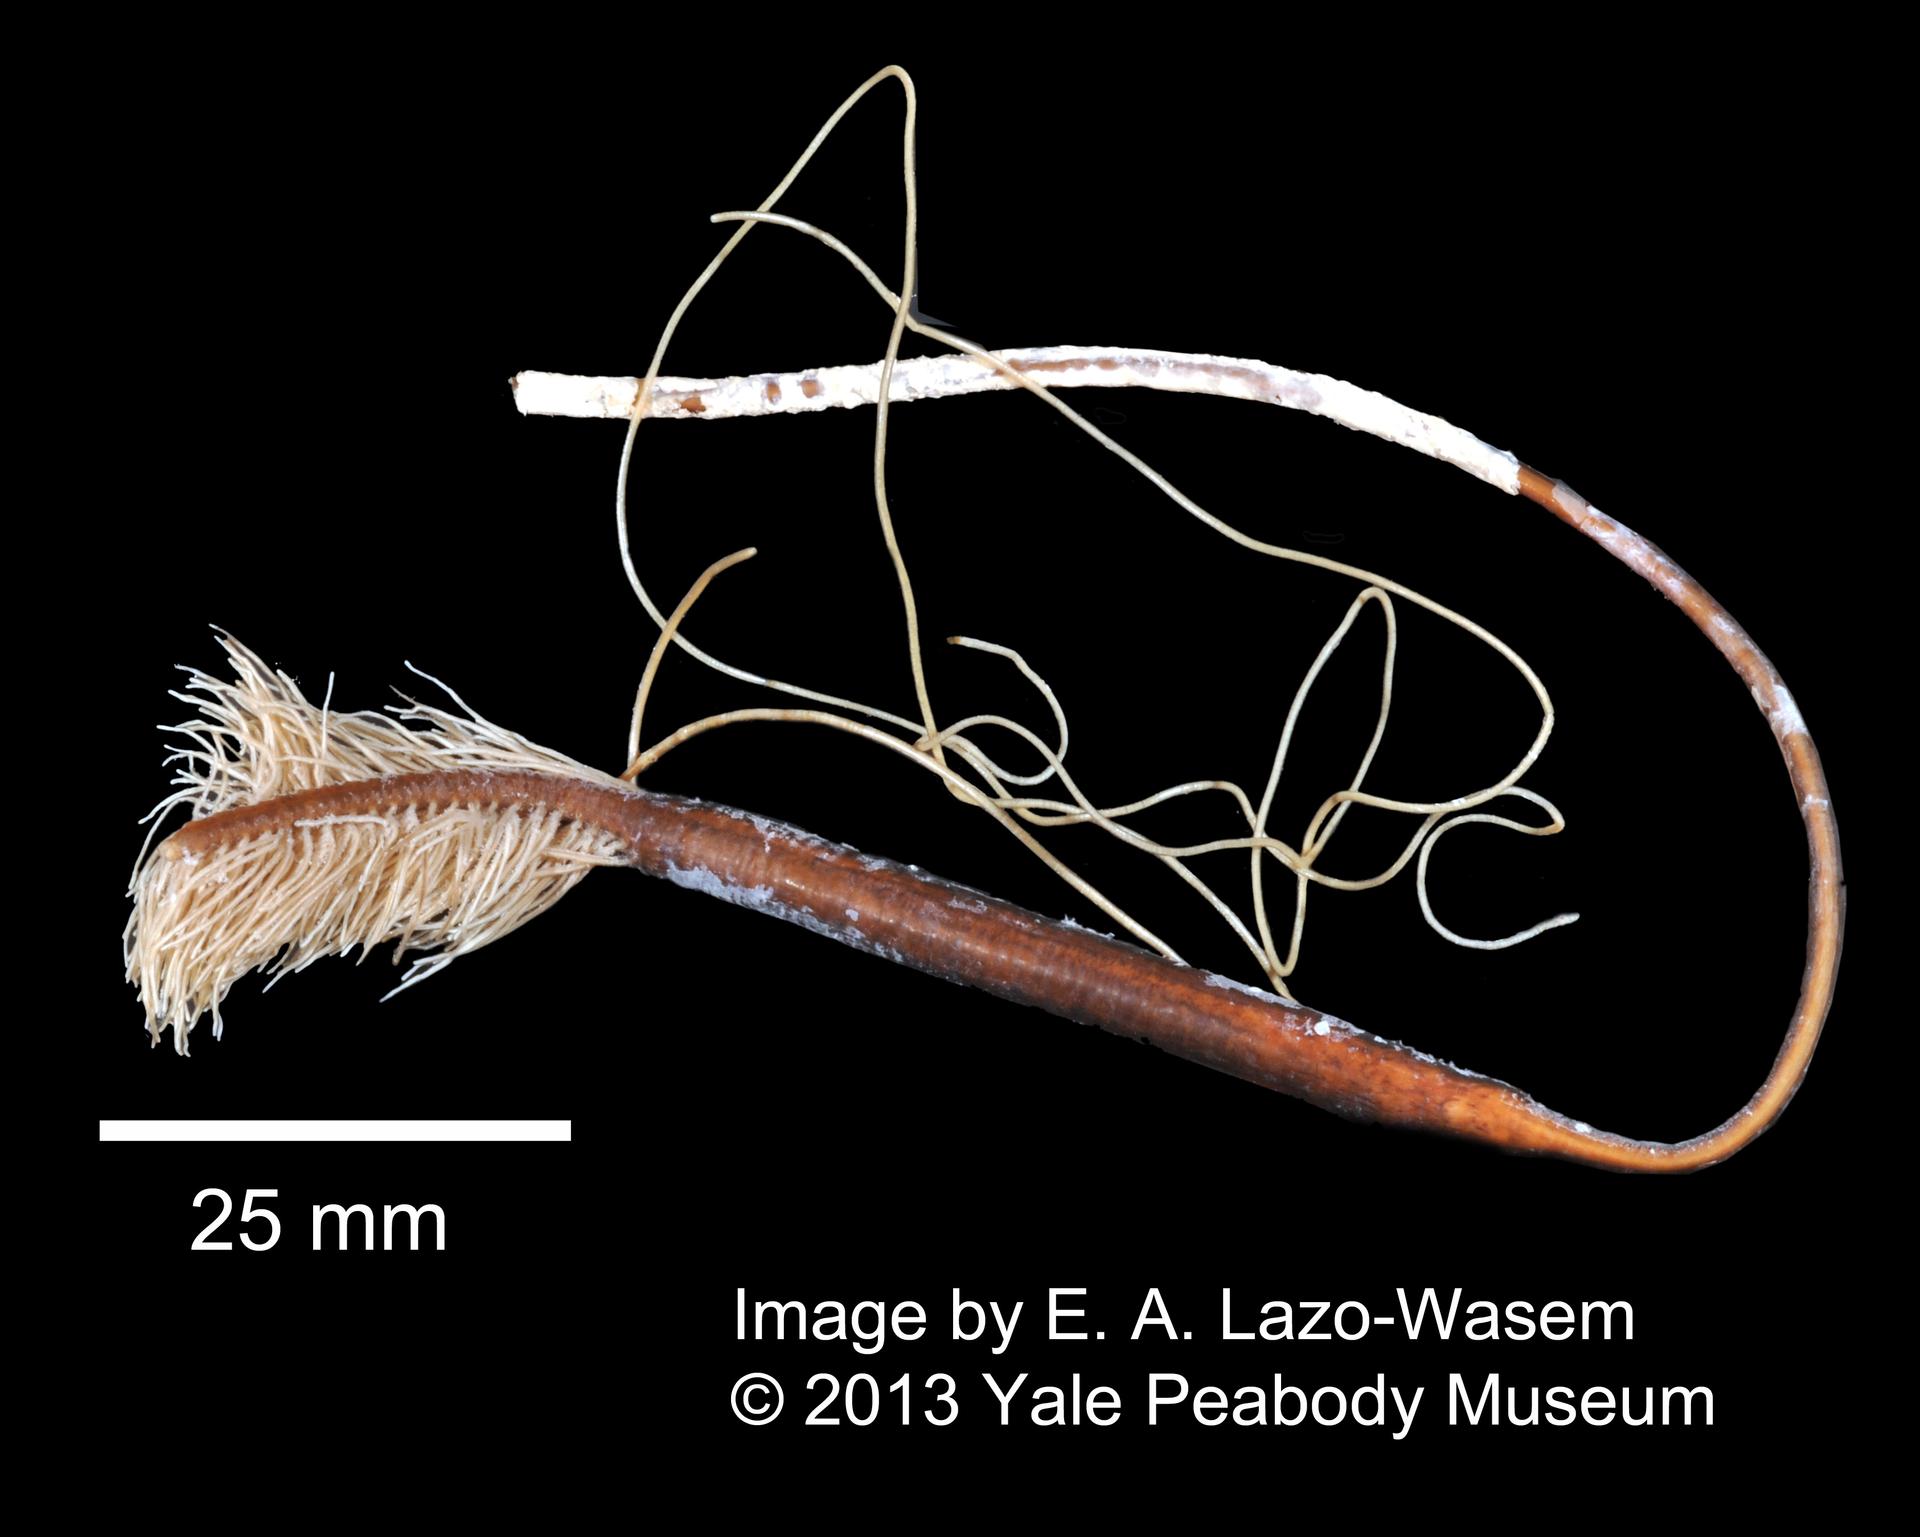 To Yale Peabody Museum of Natural History (YPM IZ 030291)